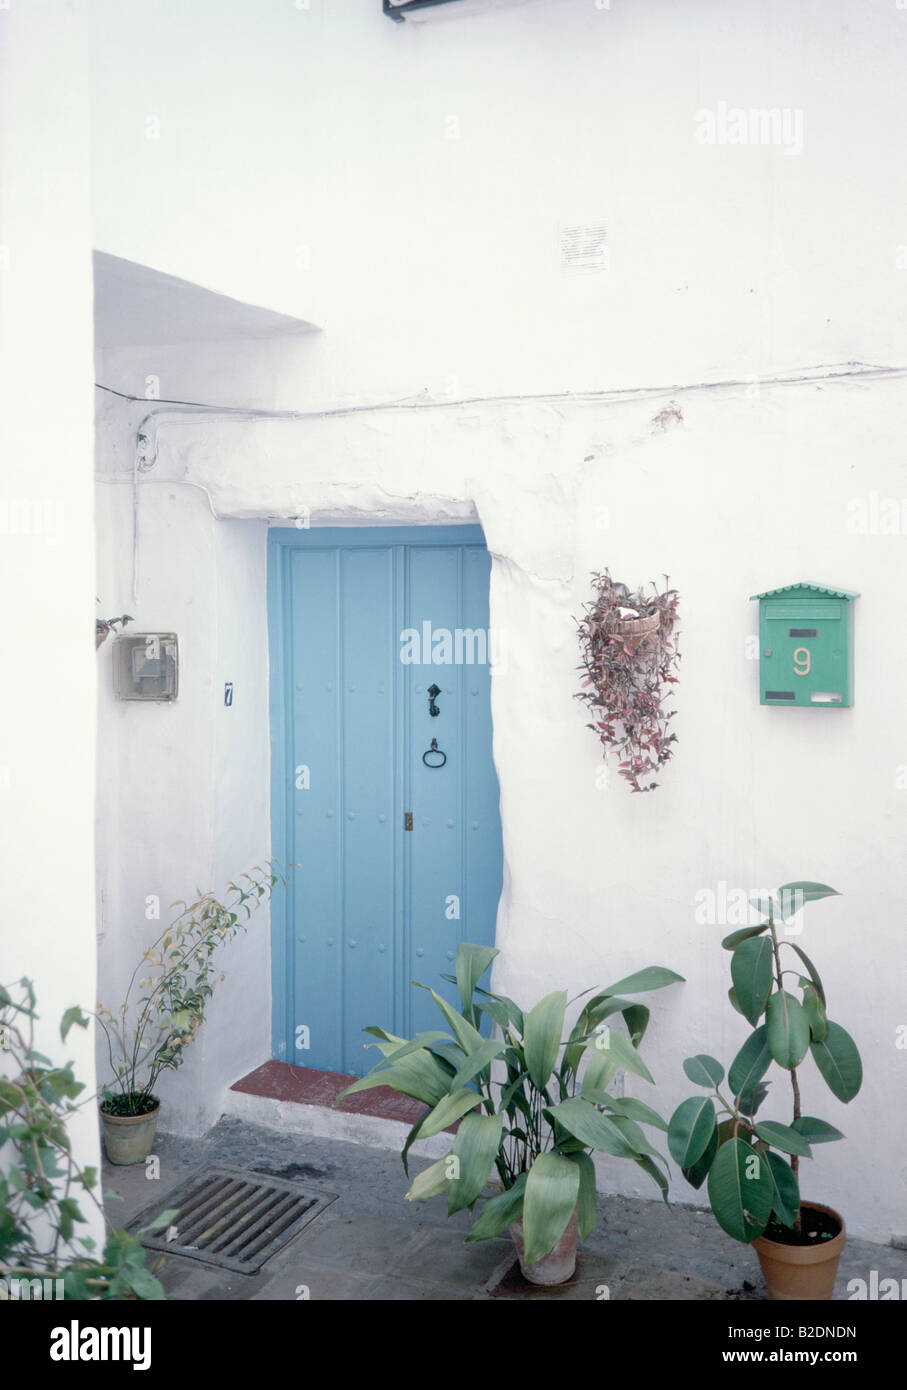 Green plants in pots in front of blue door of white Spanish village house Stock Photo